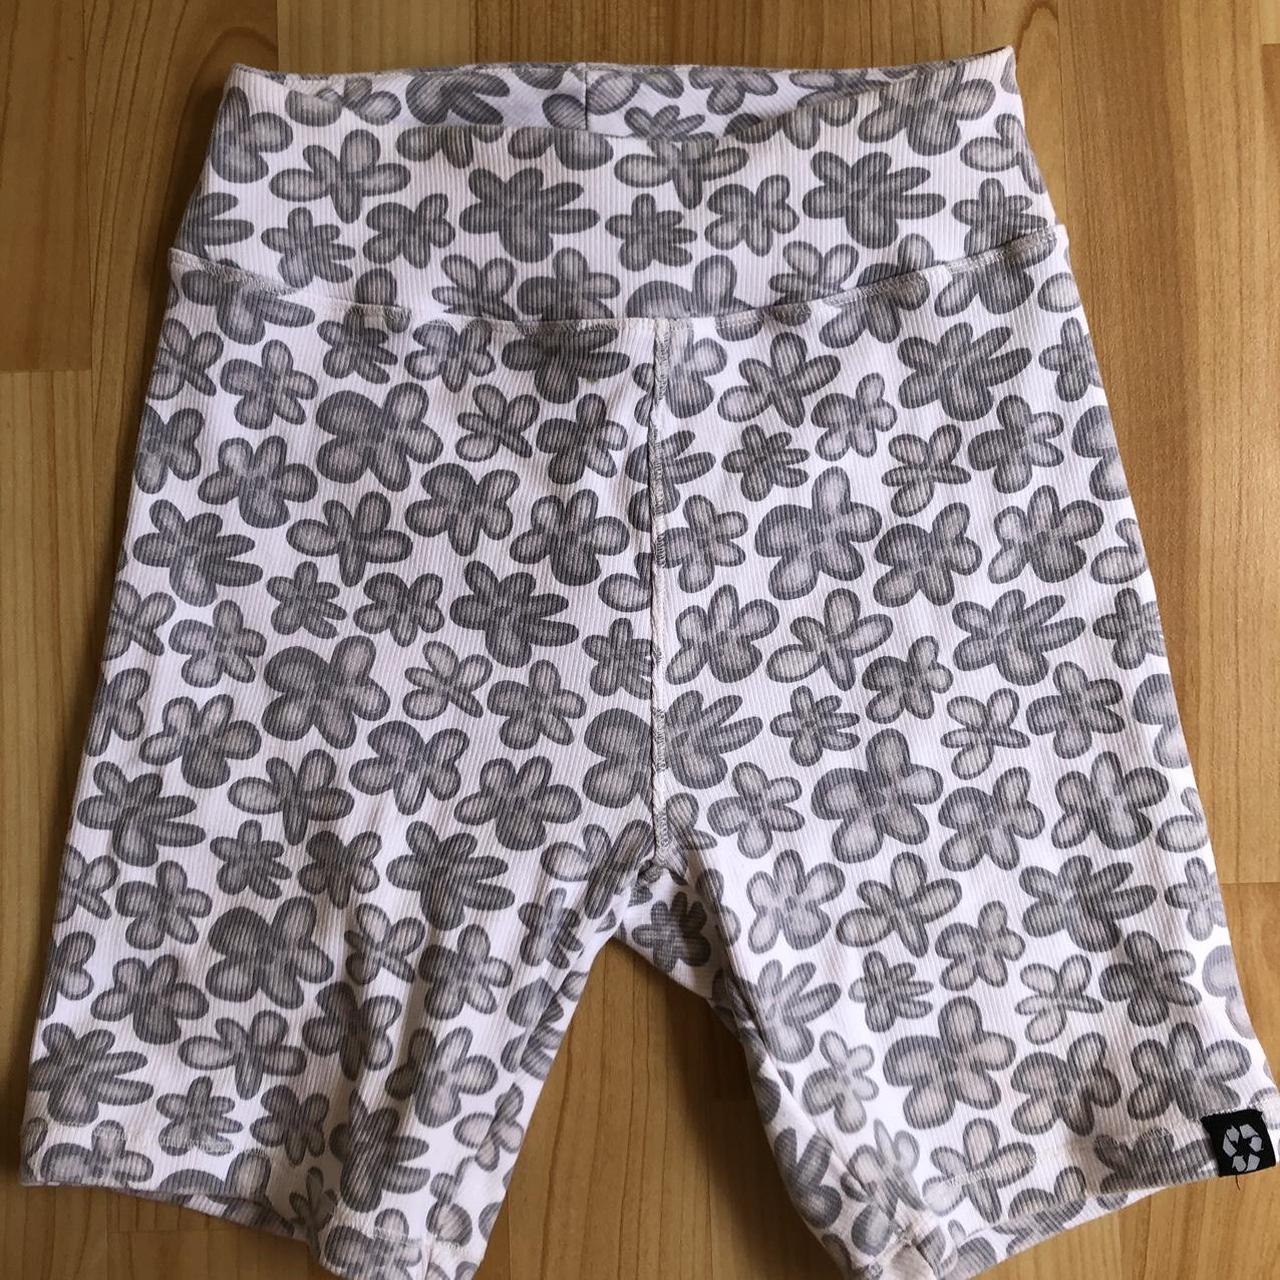 Afends Daisy print white bike shorts size small.... - Depop